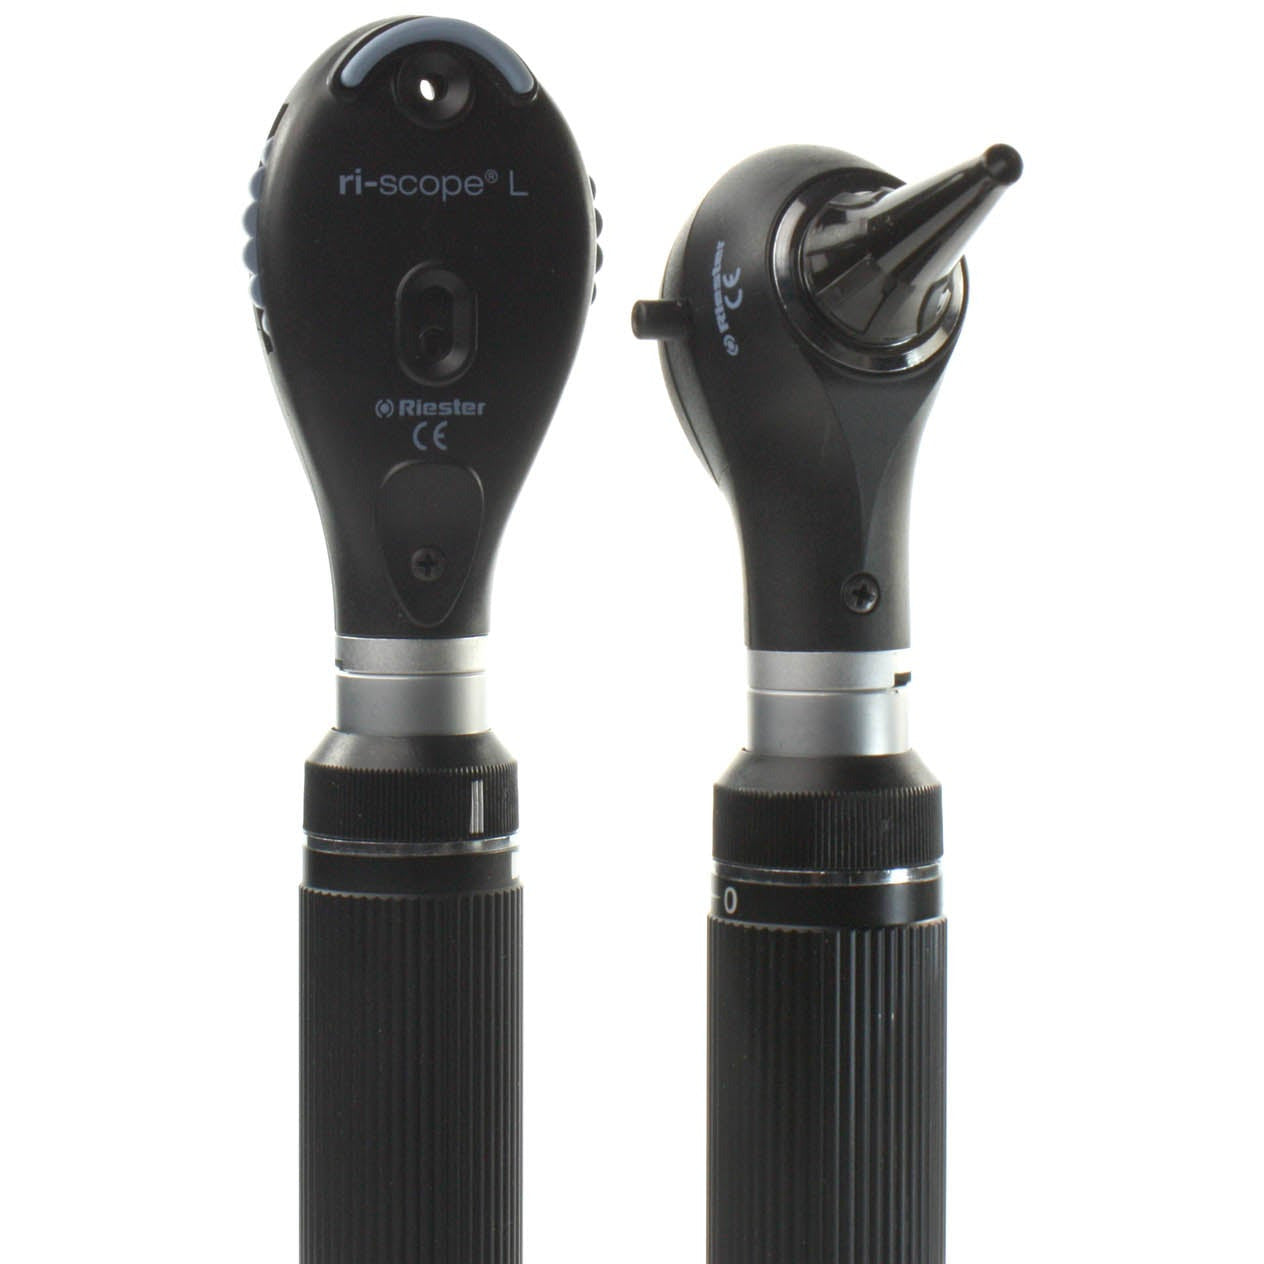 Riester Ri-scope L2 Otoscope and Ophthalmoscope 3.5V LED Set